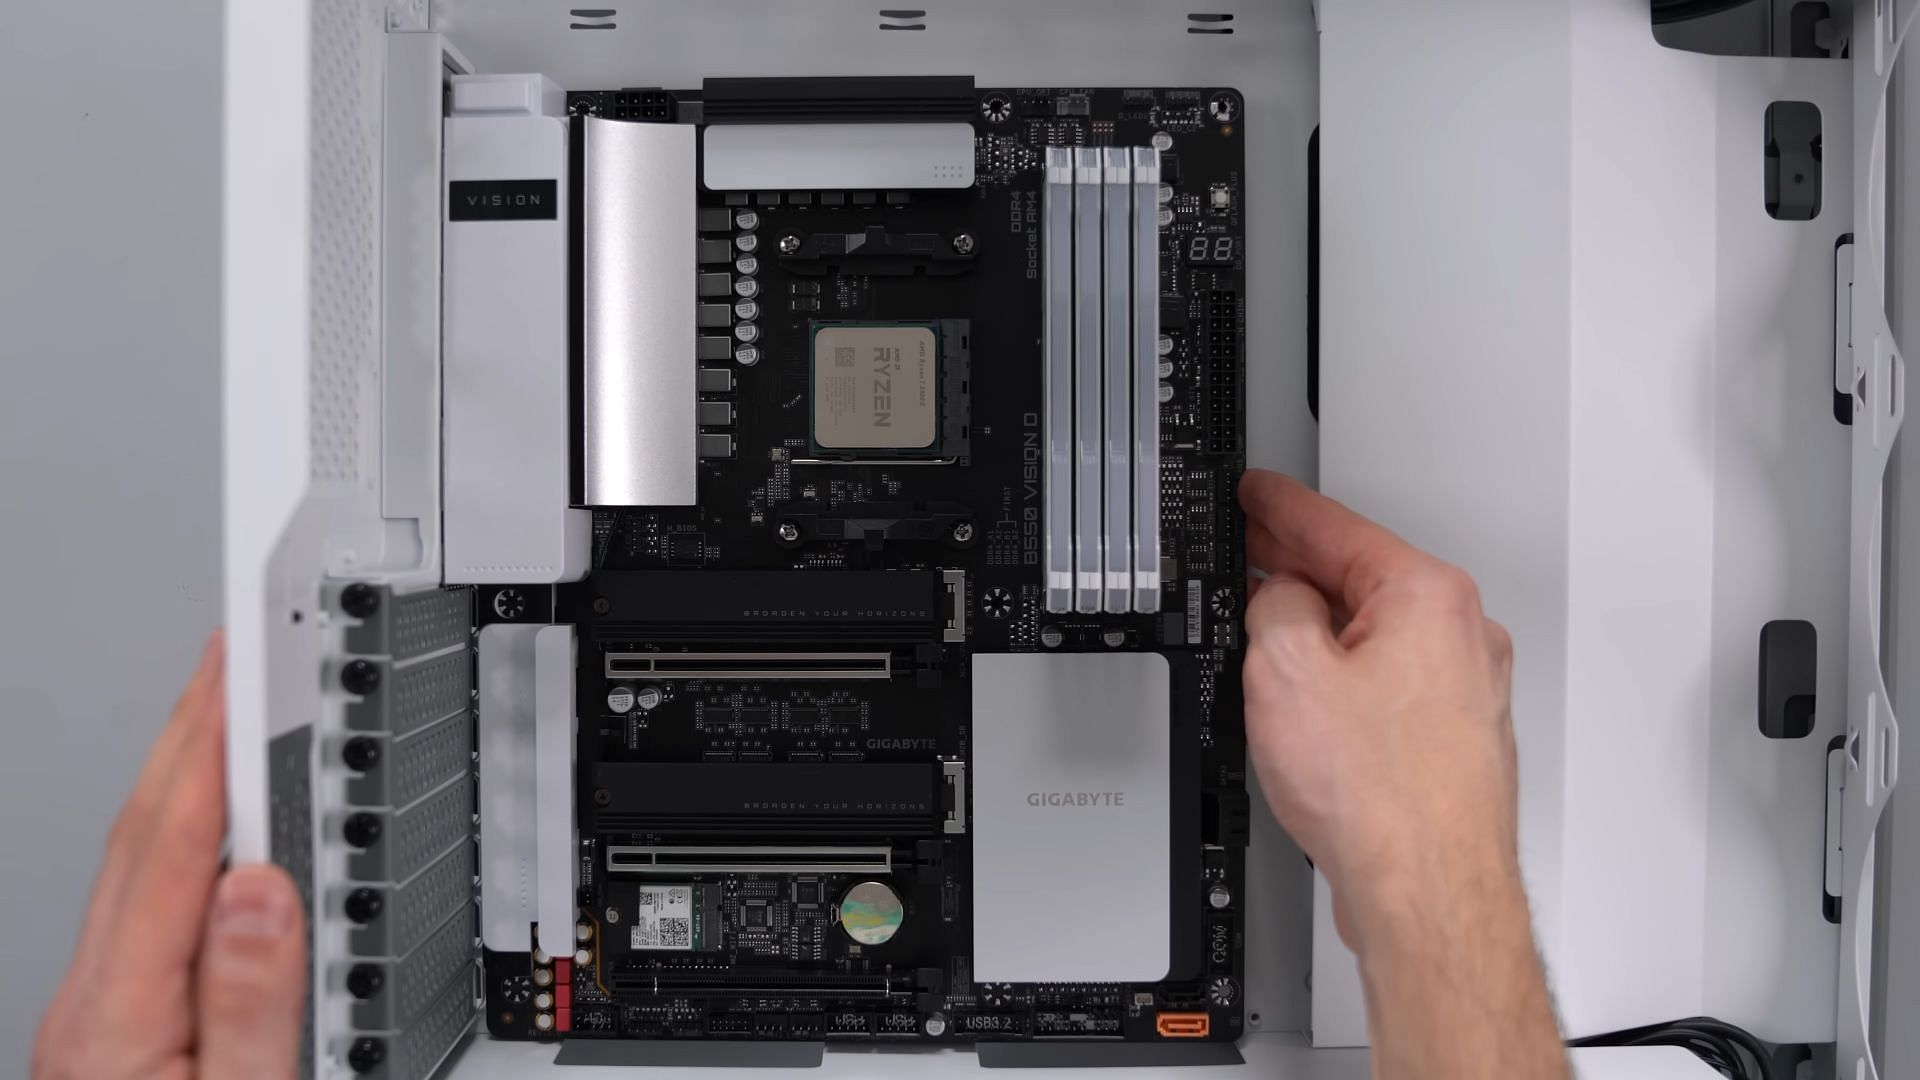 Motherboard installation (Image via TechSource/YouTube)